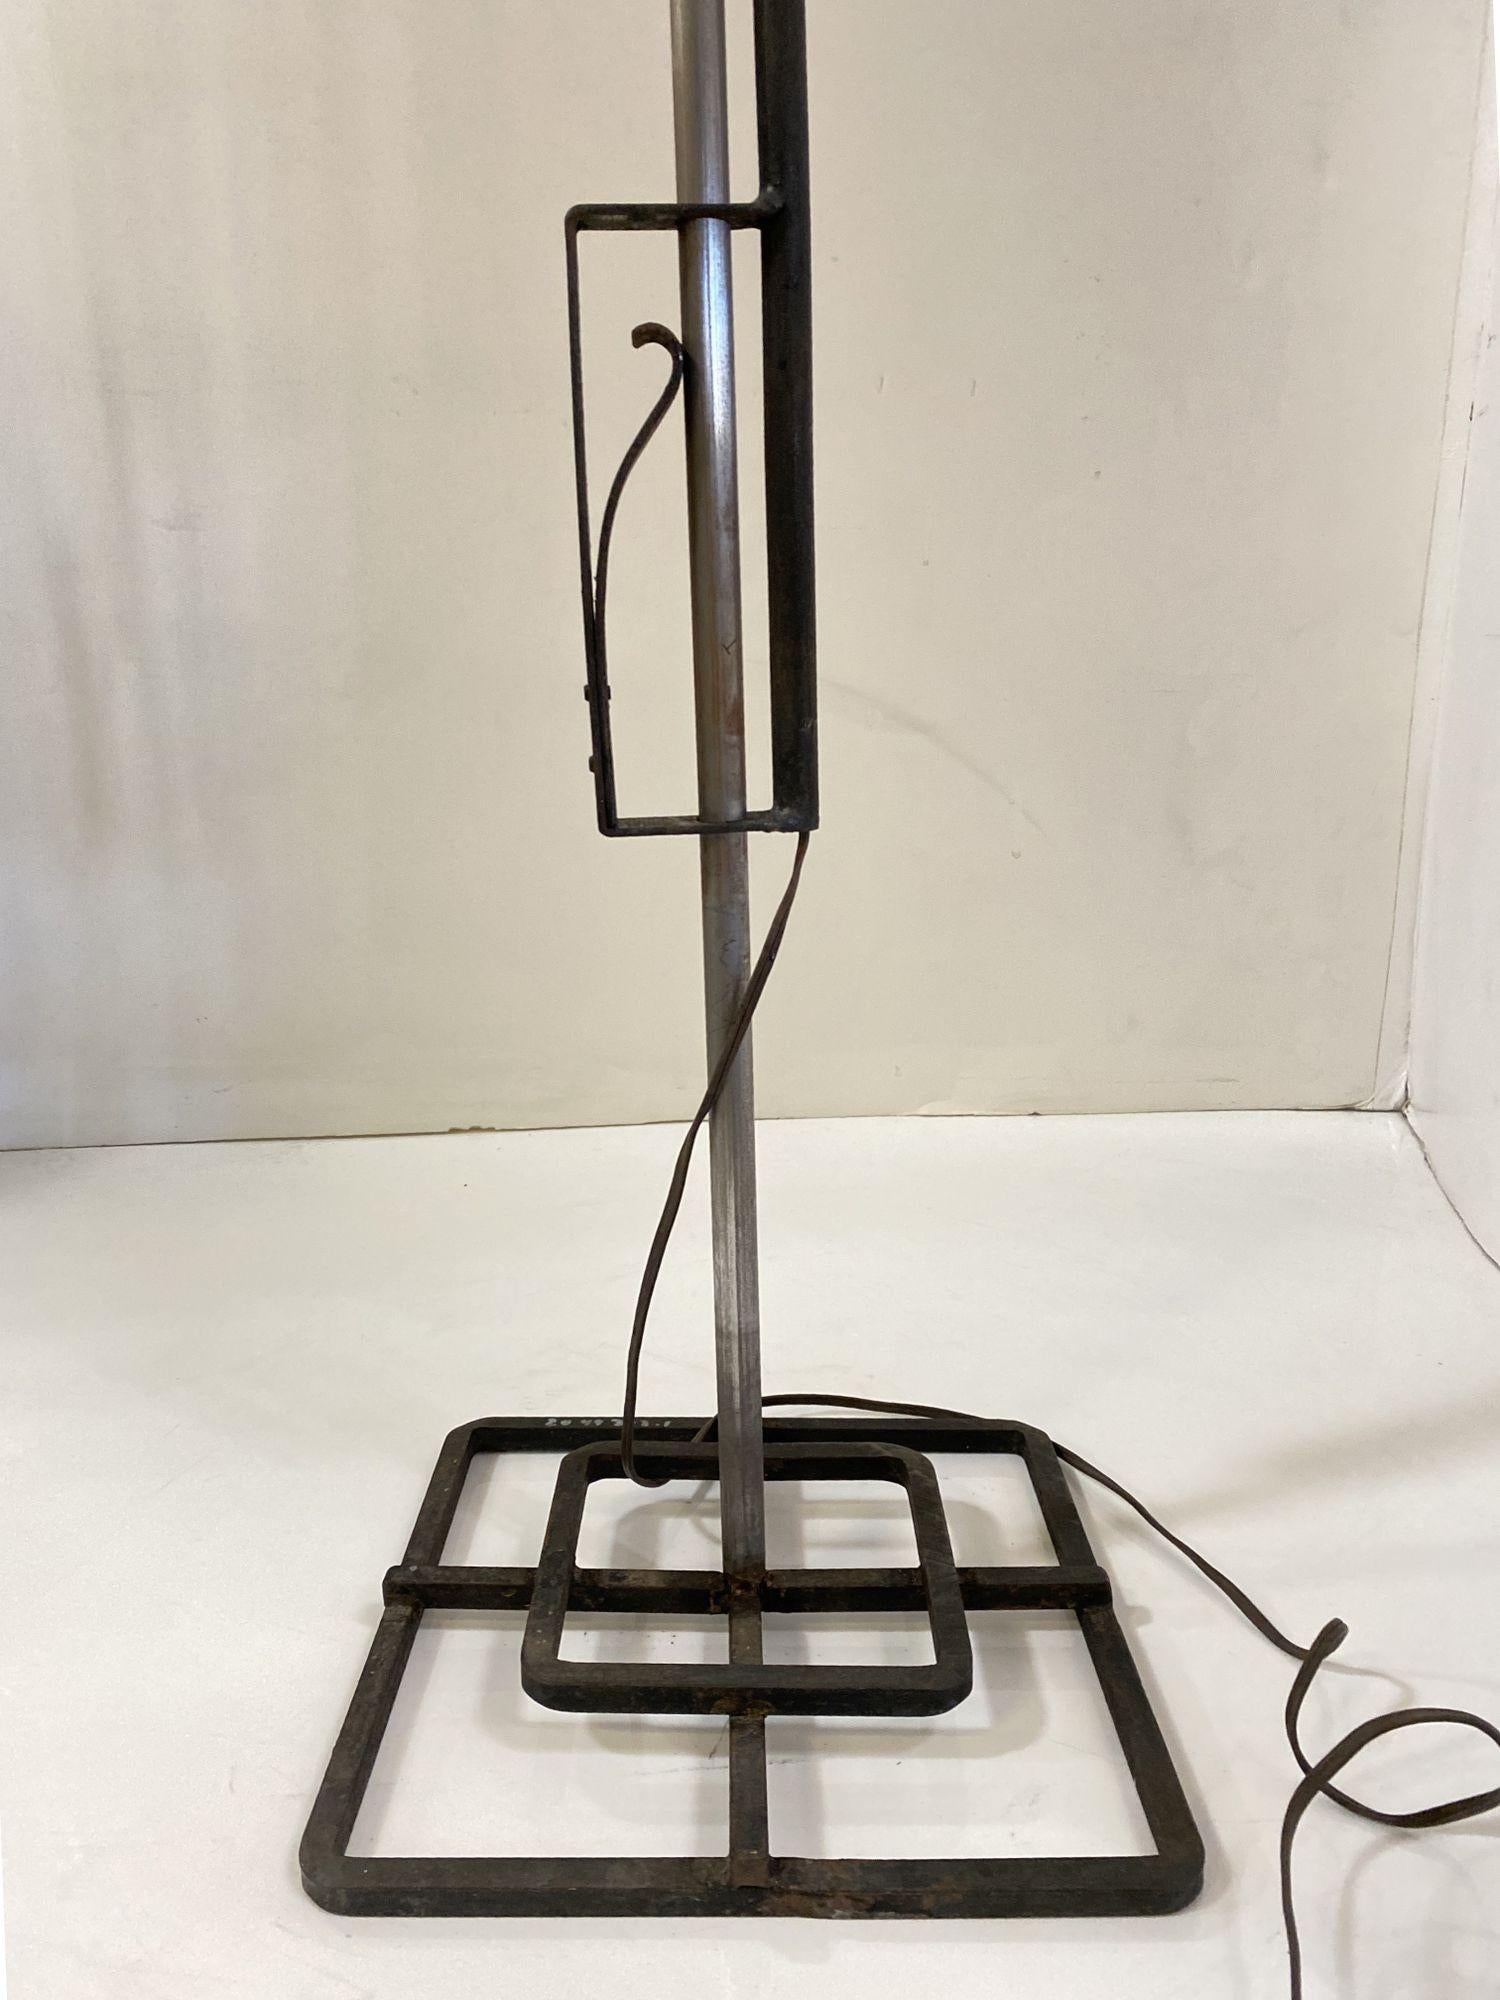 Late Mission Wrought Iron Adjustable Floor Lamp w/ Shade In Excellent Condition For Sale In Van Nuys, CA